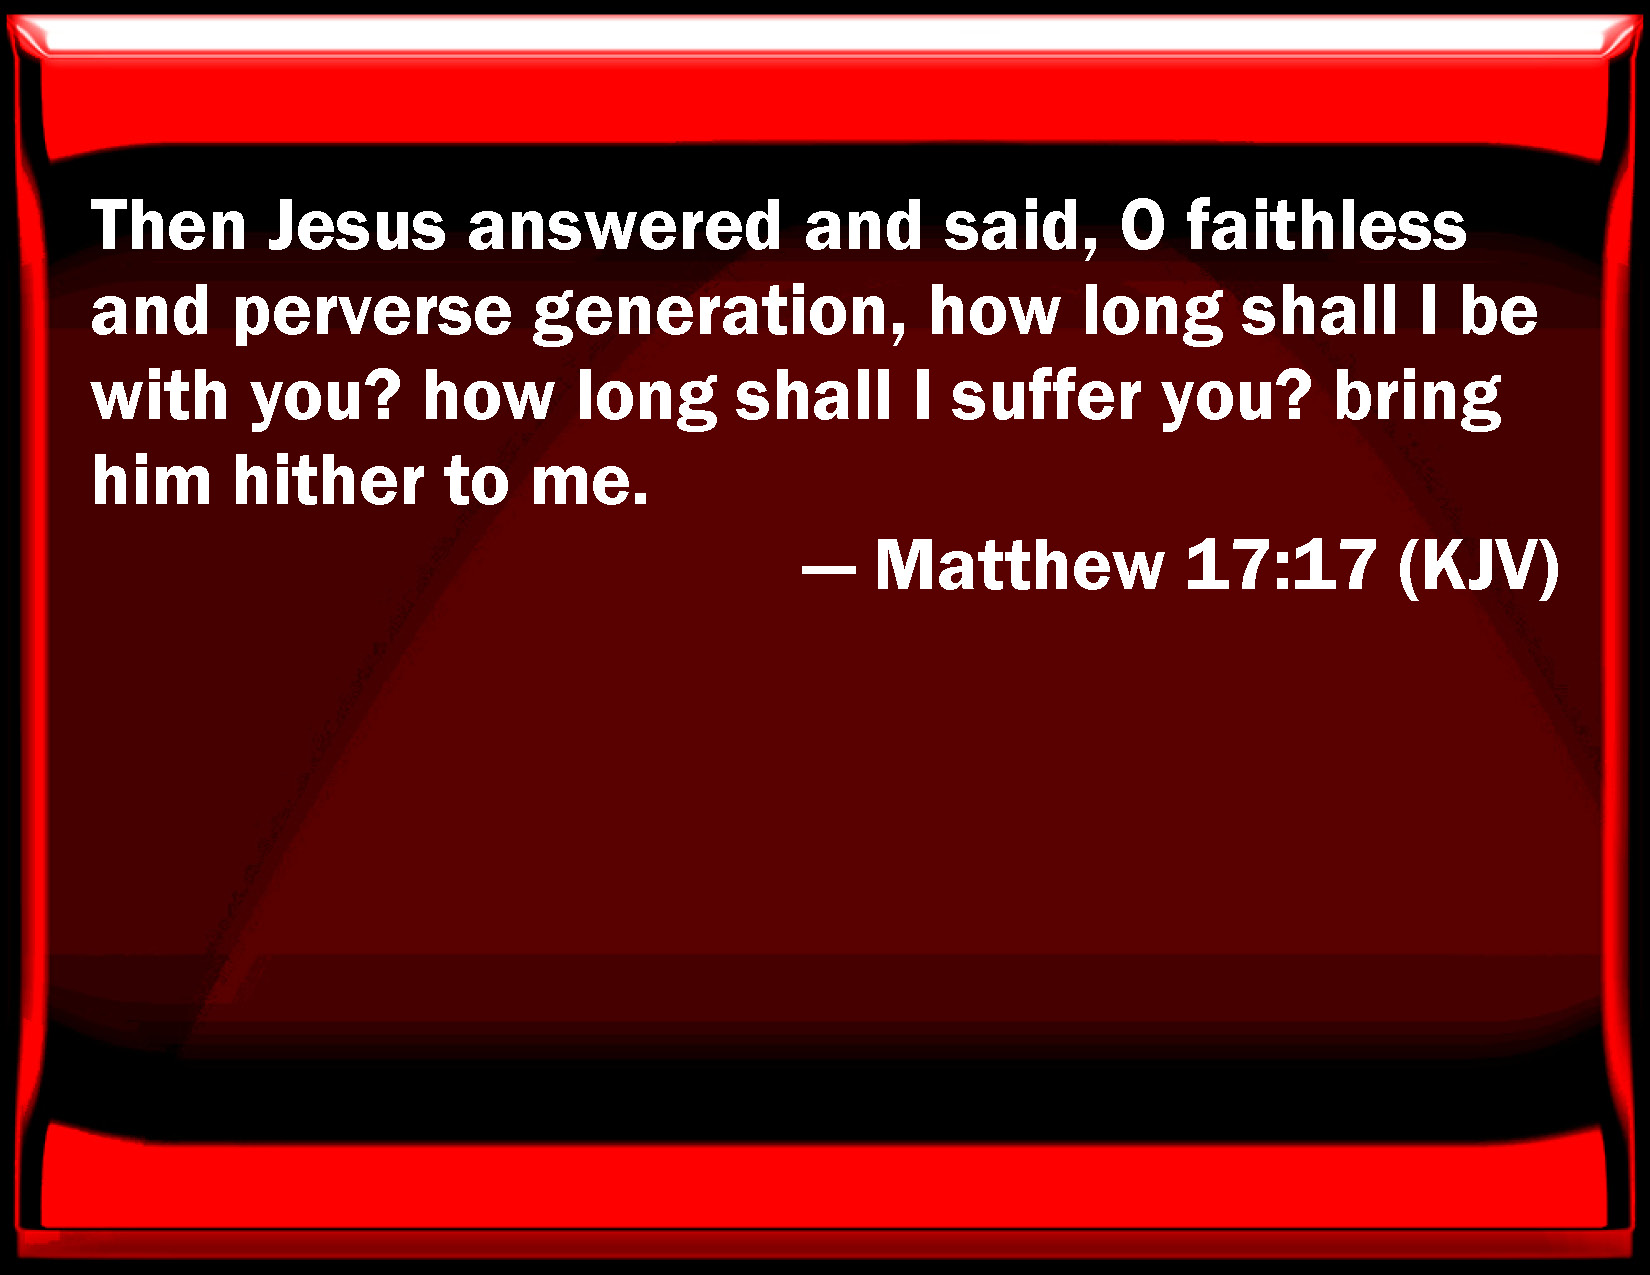 matthew-17-17-then-jesus-answered-and-said-o-faithless-and-perverse